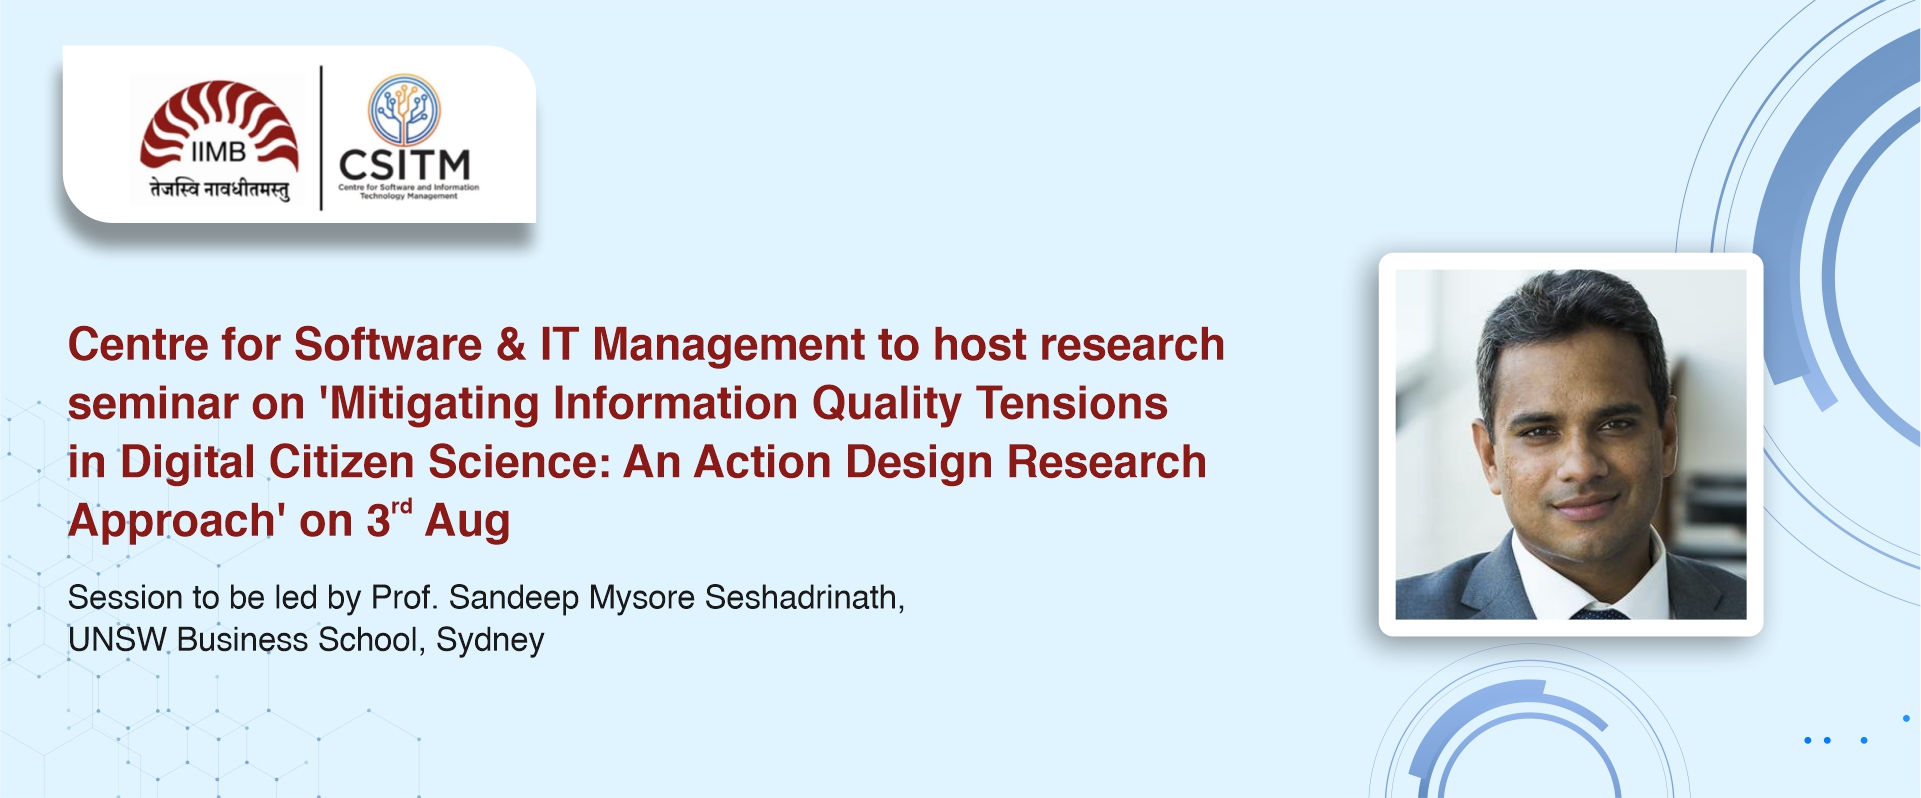 Centre for Software & IT Management to host research seminar on ‘Mitigating Information Quality Tensions in Digital Citizen Science: An Action Design Research Approach’ on 3rd Aug